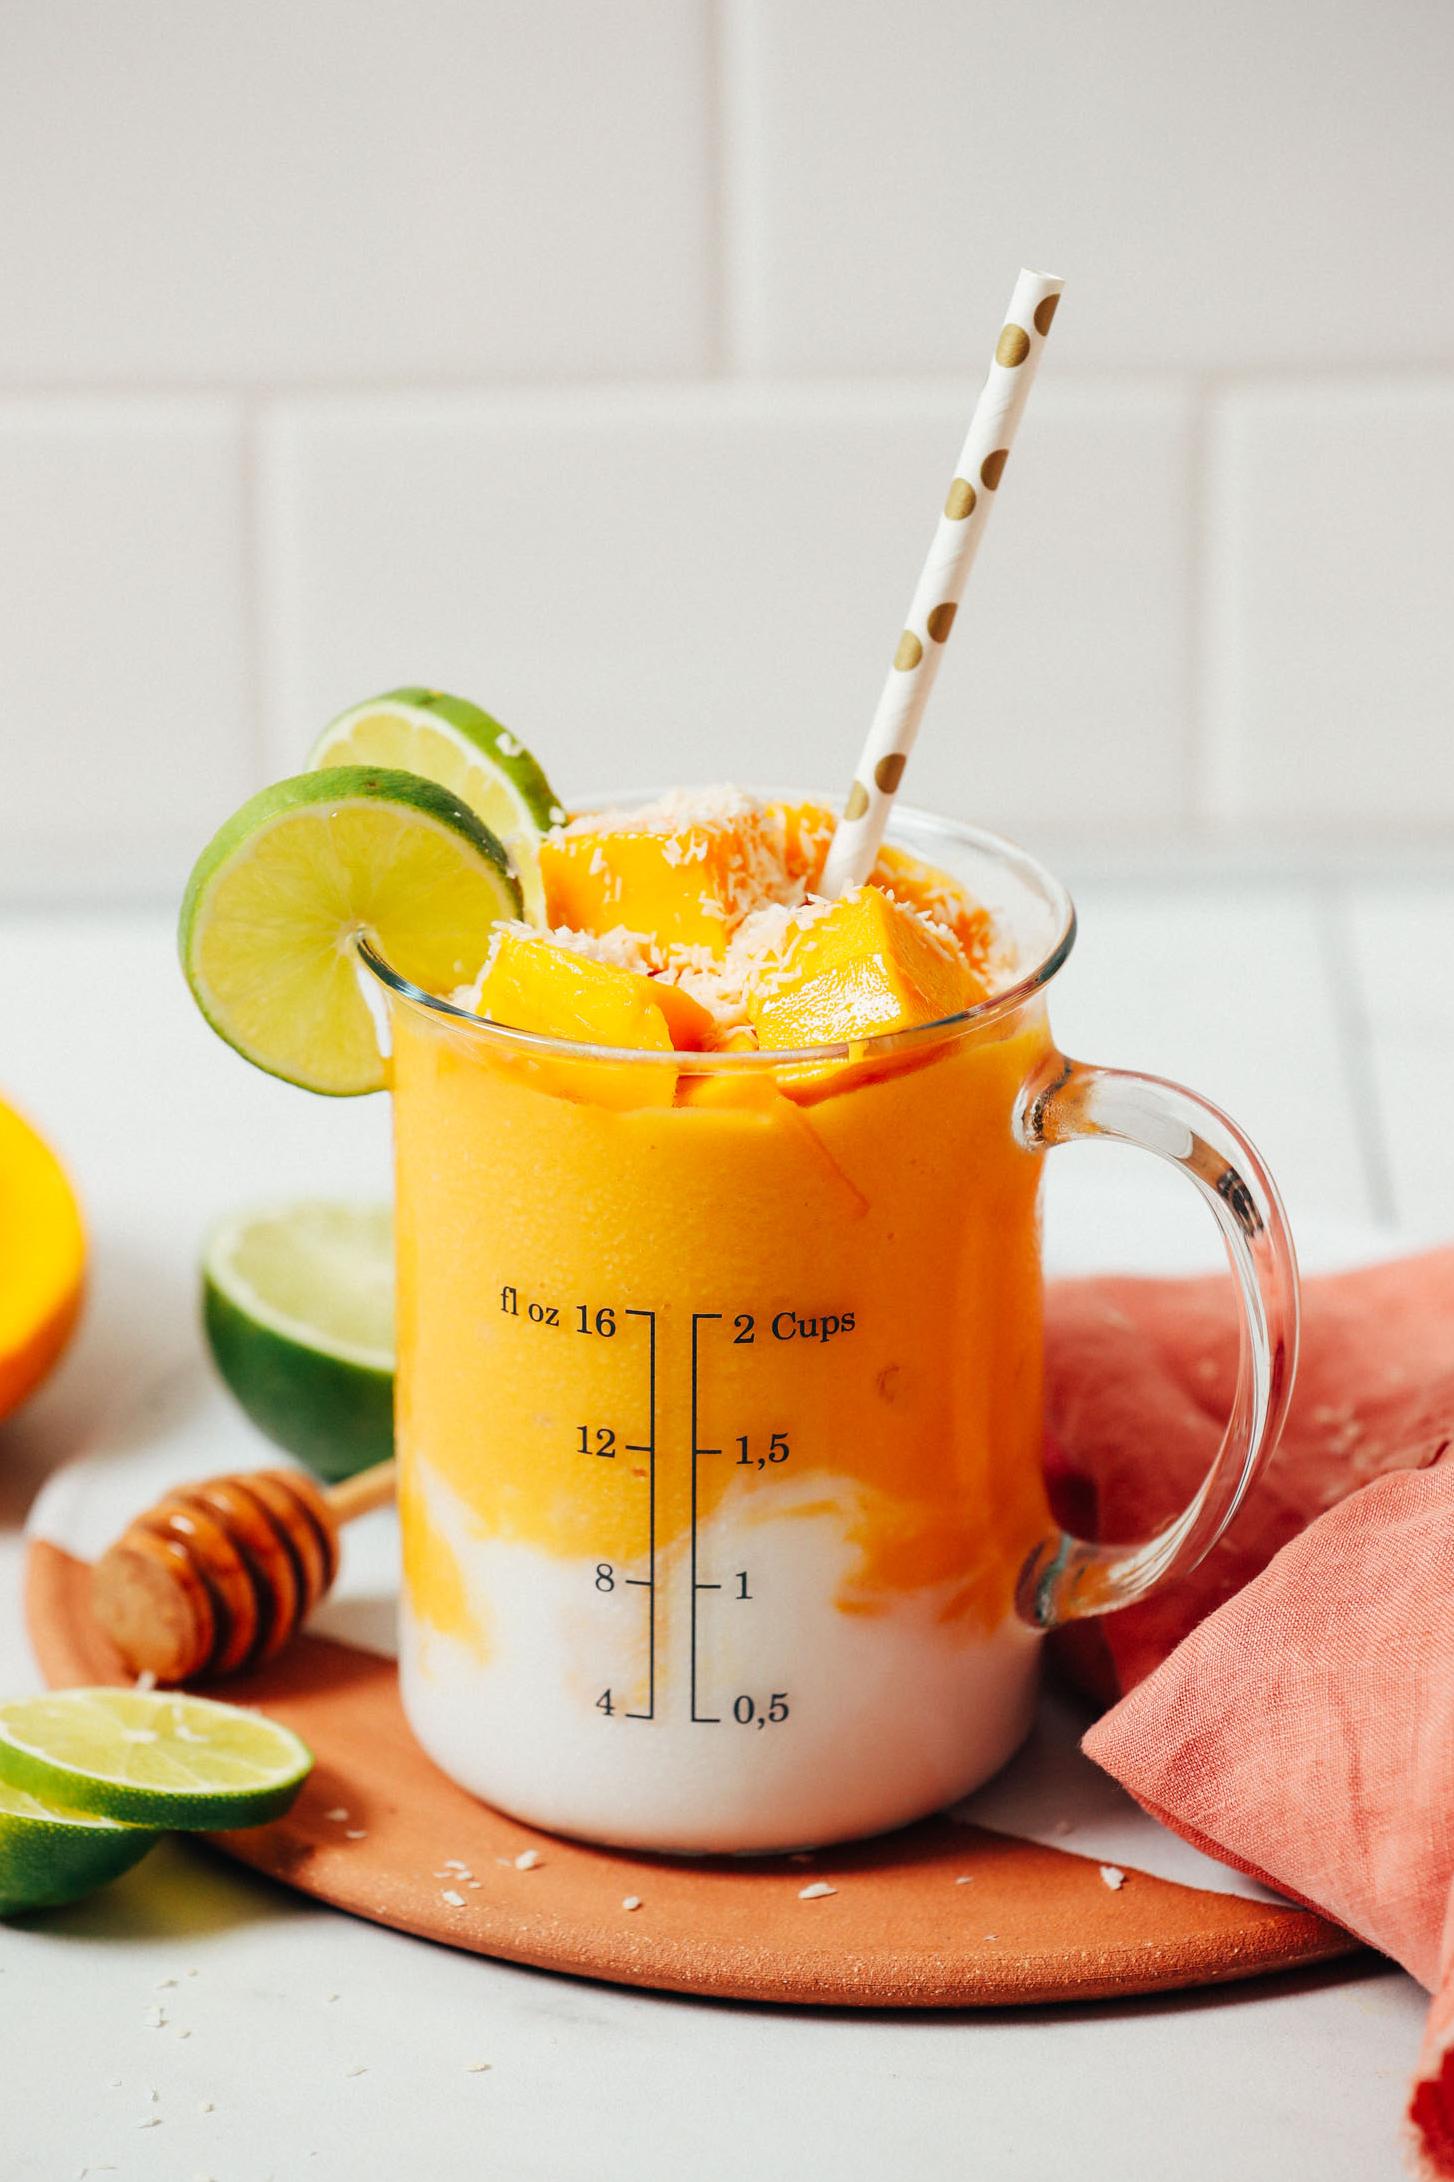  Get ready to taste the tropics with this mango-infused delight.